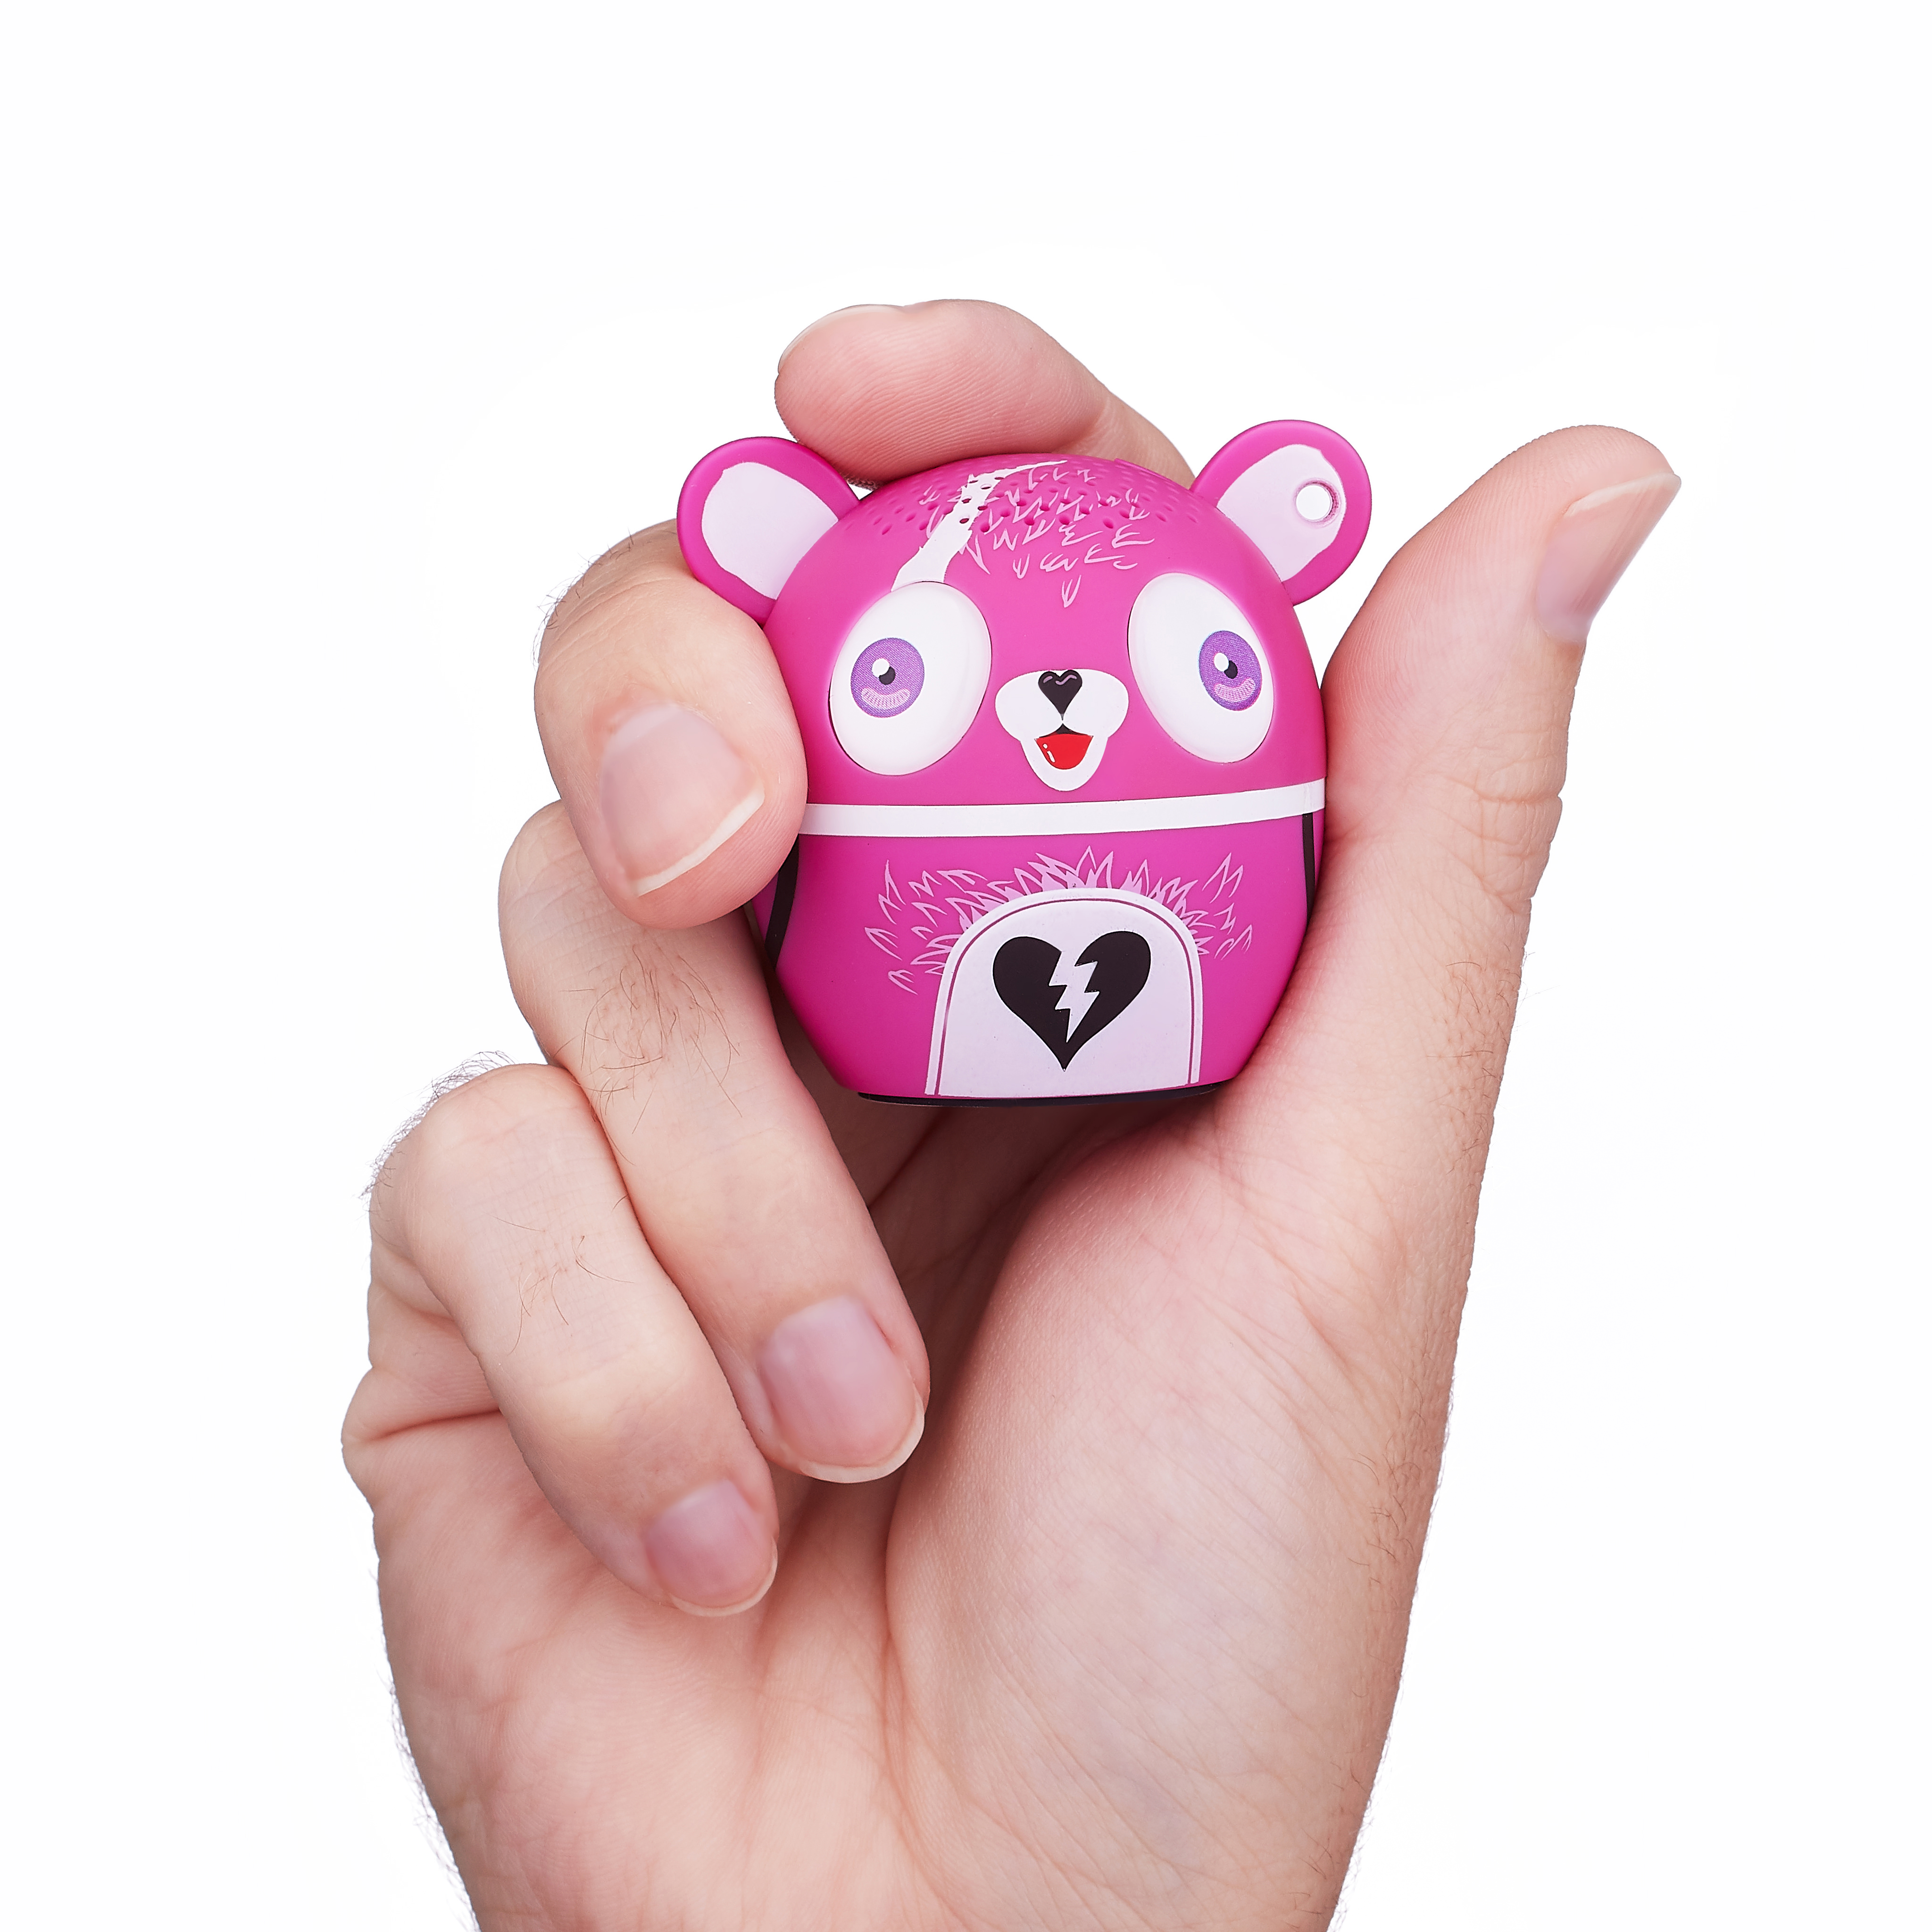 Fortnite Cuddle Team Leader - Collectible Bluetooth Speaker - image 2 of 2